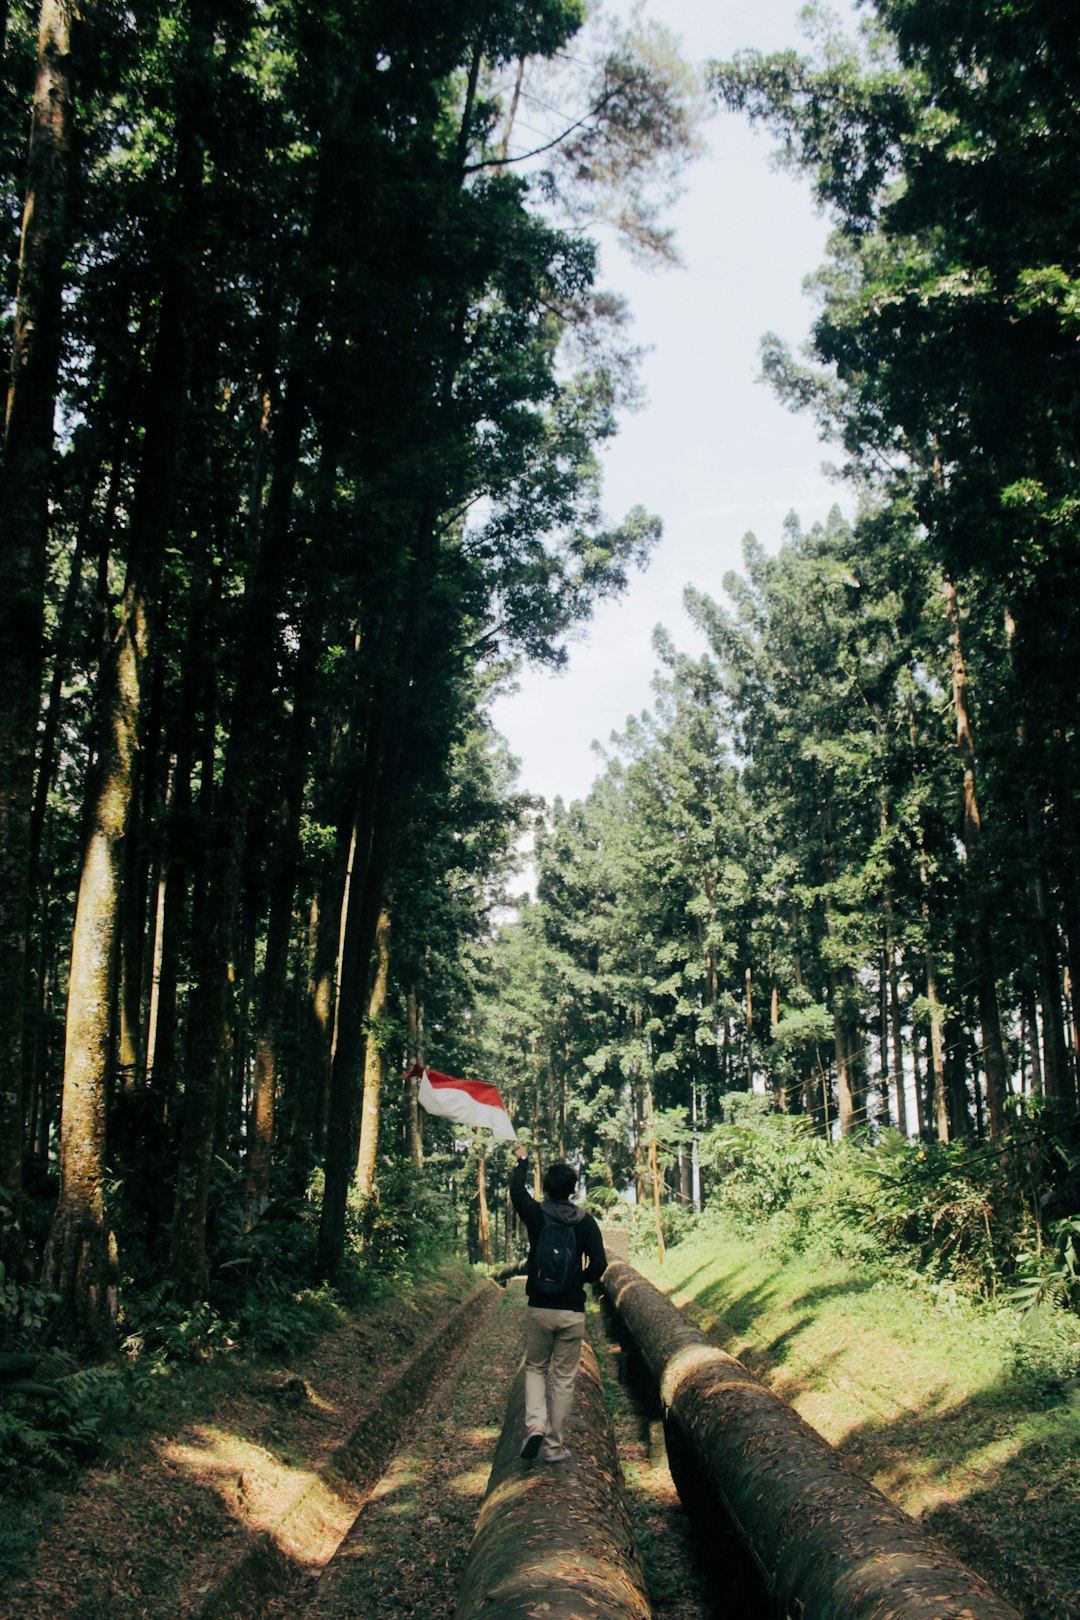 travelers stories about Forest in Purwokerto, Indonesia